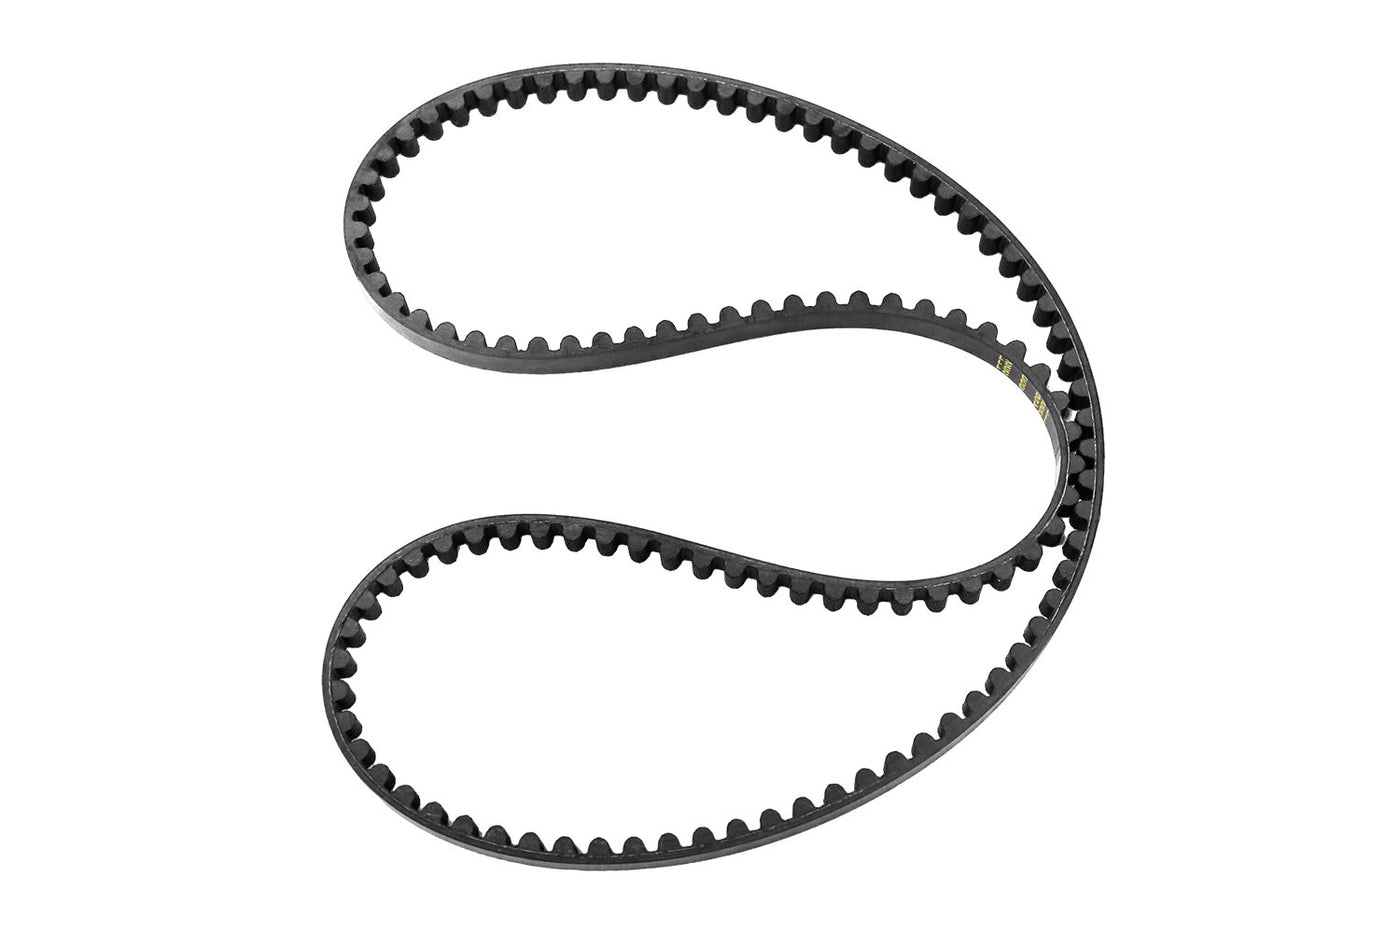 Magicycle Commuter Drive Belt Replacement